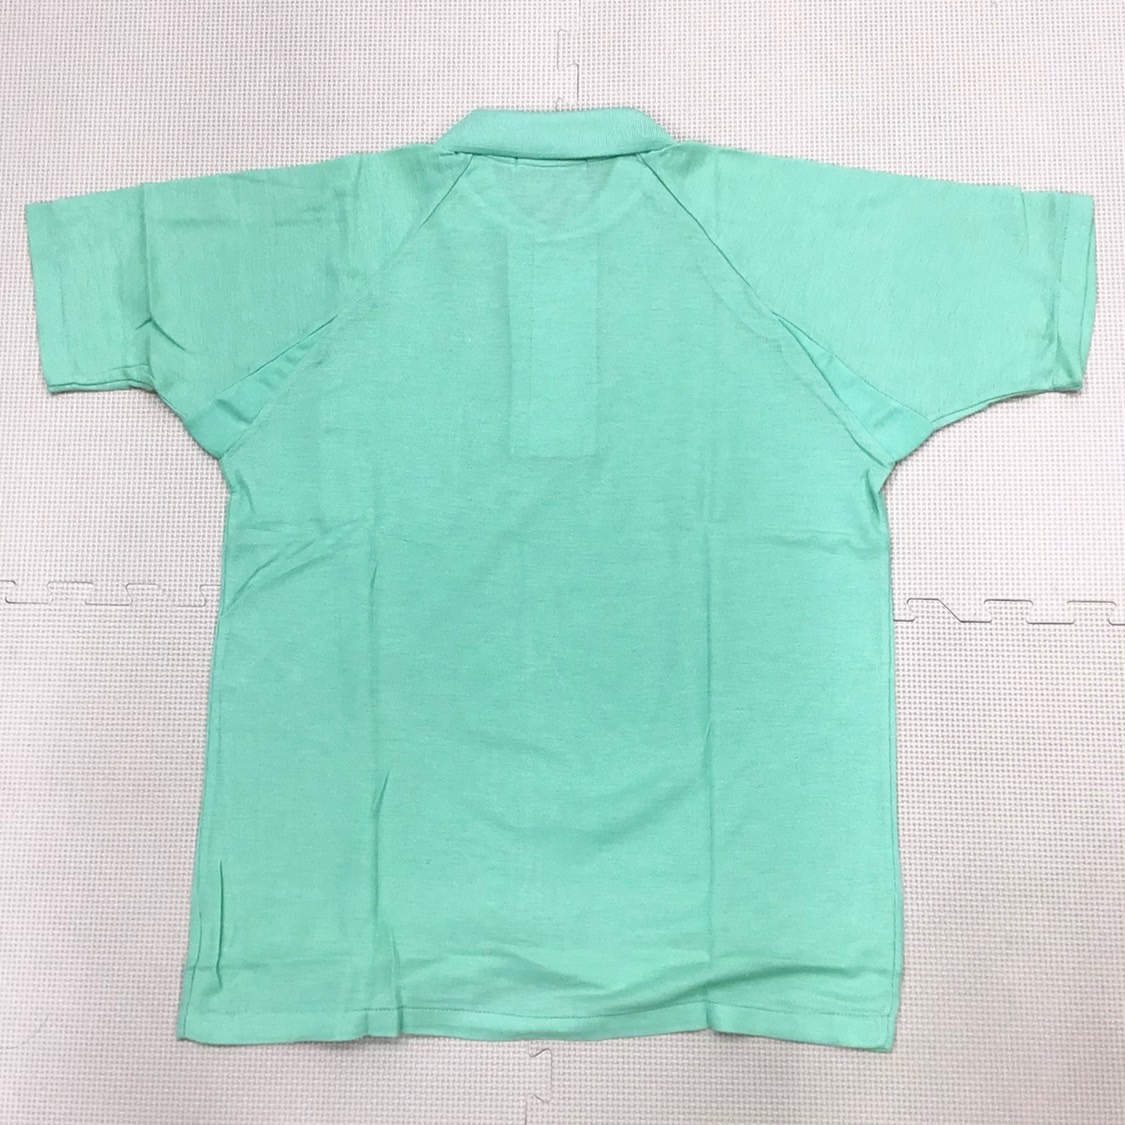 ( unused goods ) Plum Field polo-shirt with short sleeves size M / light green / green / made in Japan / with pocket / uniform / work clothes / working clothes / sport wear 